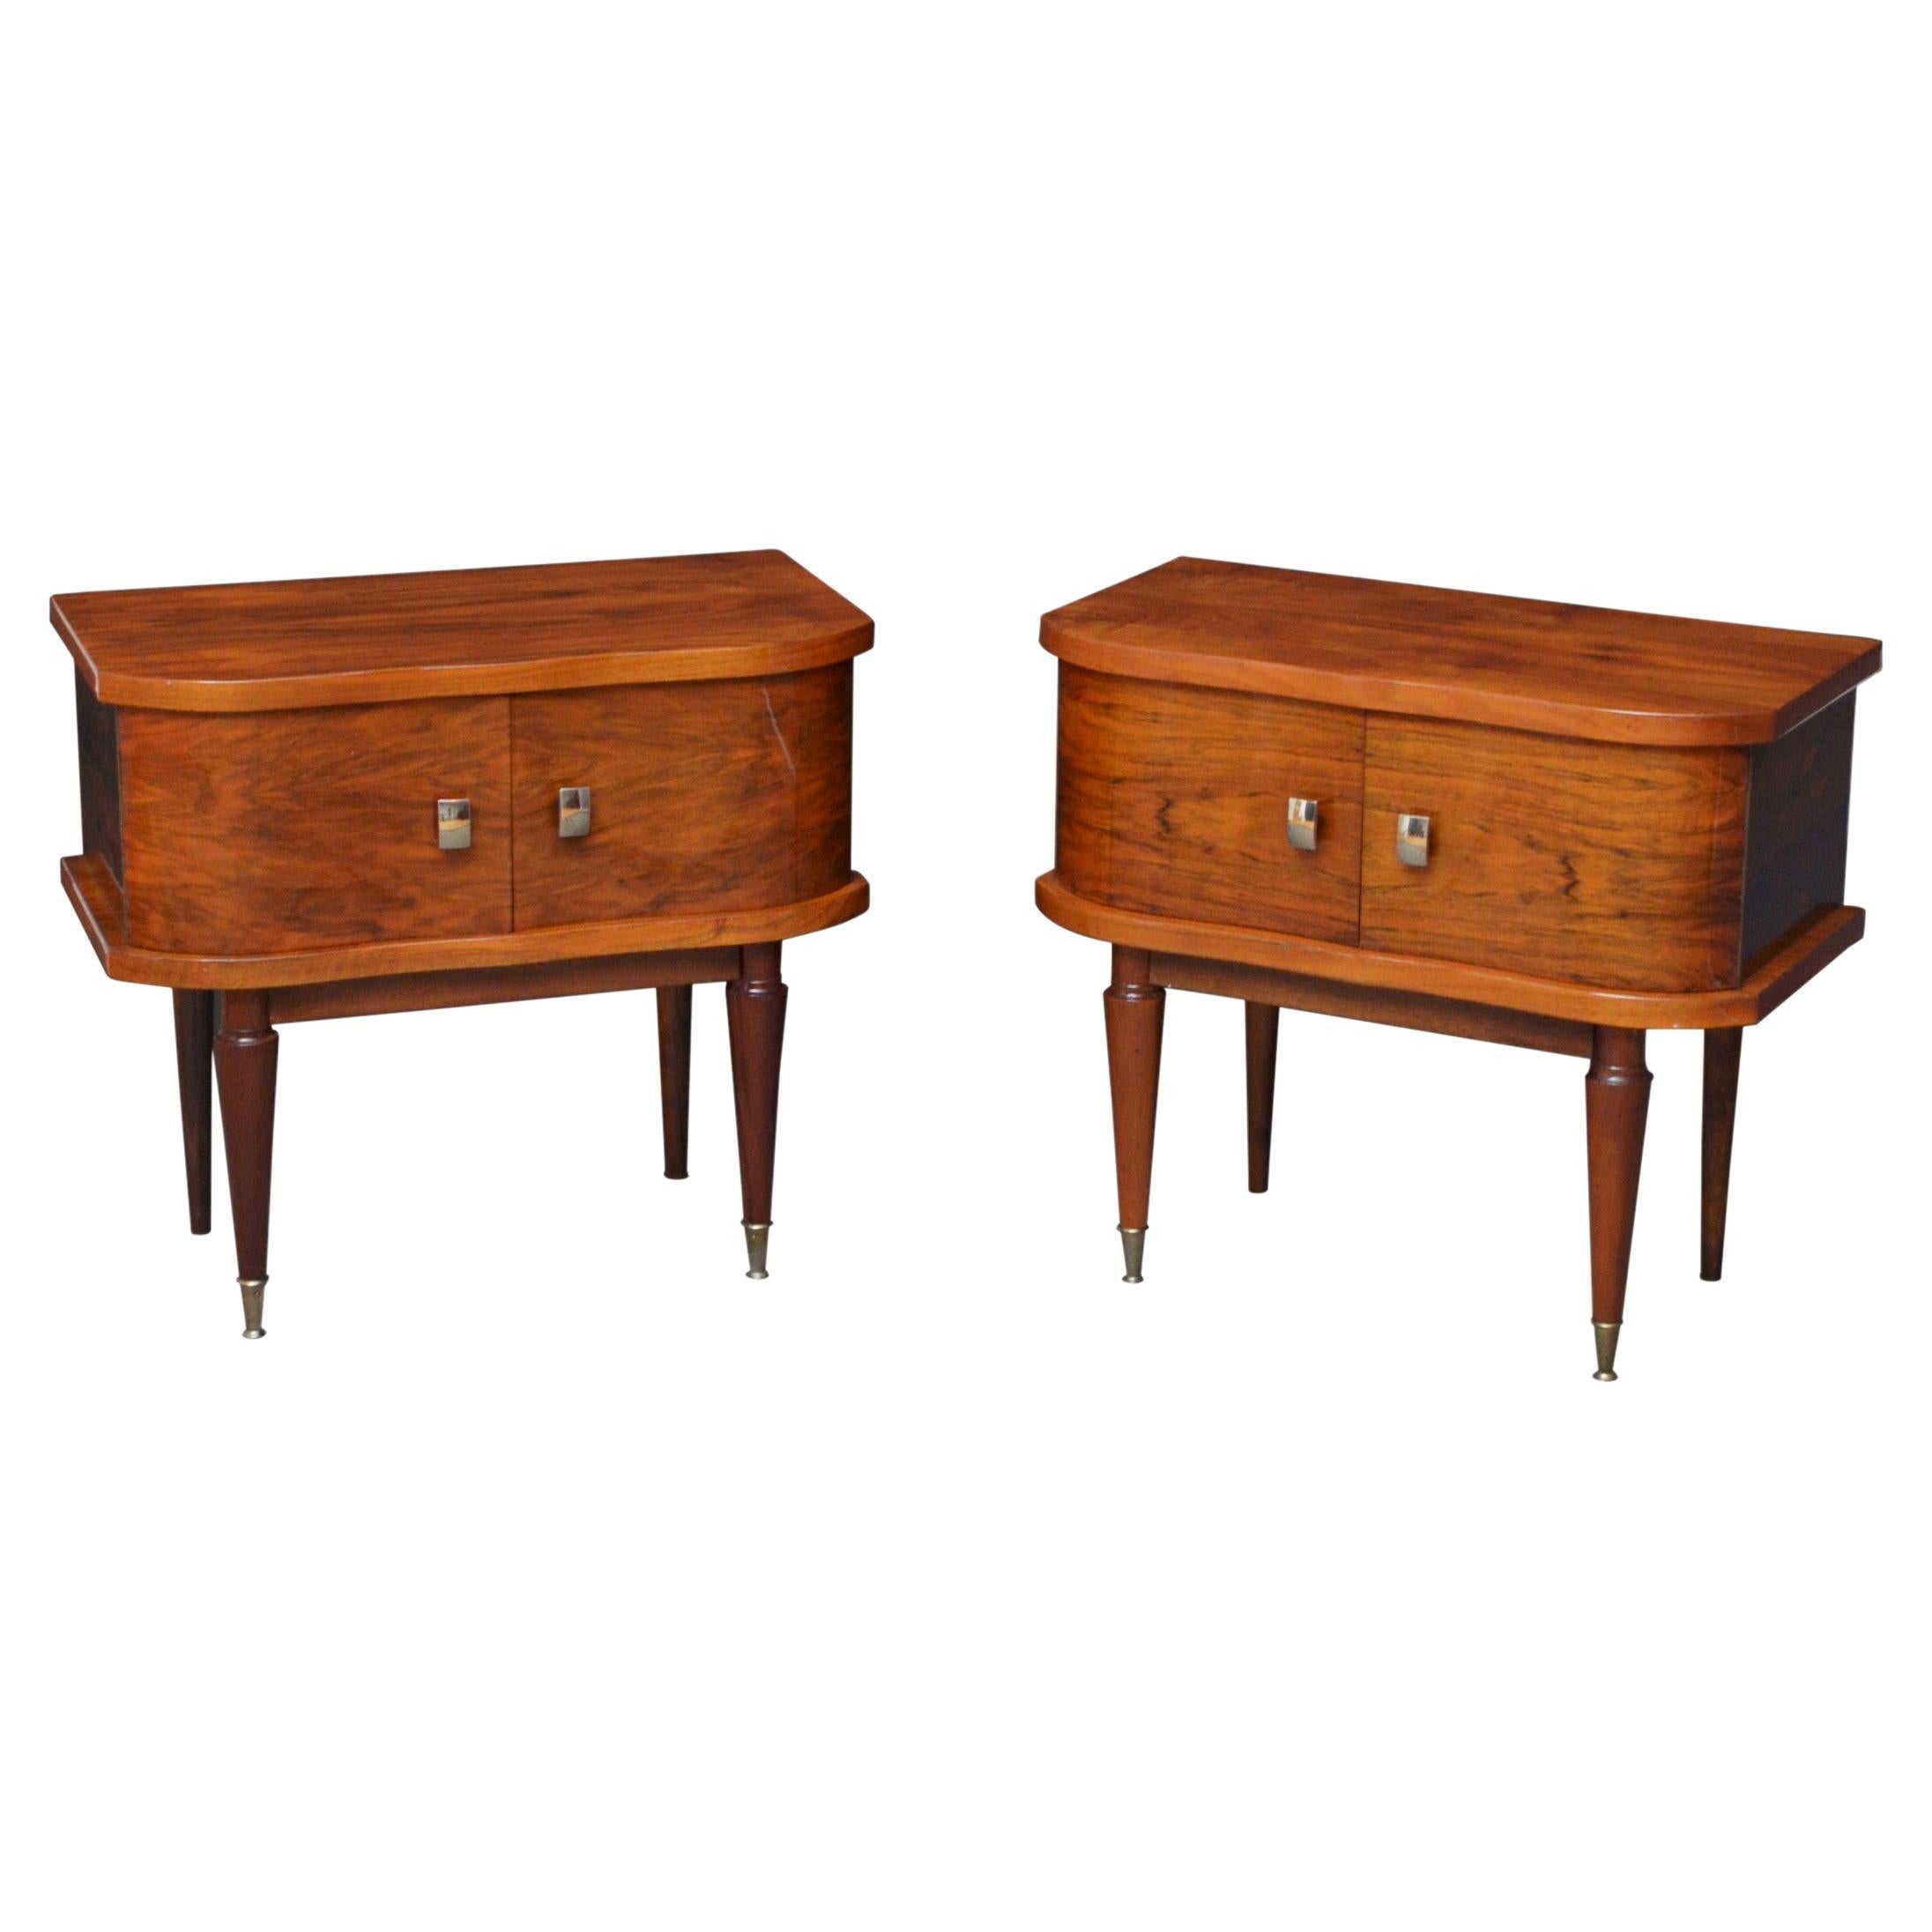 Pair of Figured Walnut Low Bedside Cabinets